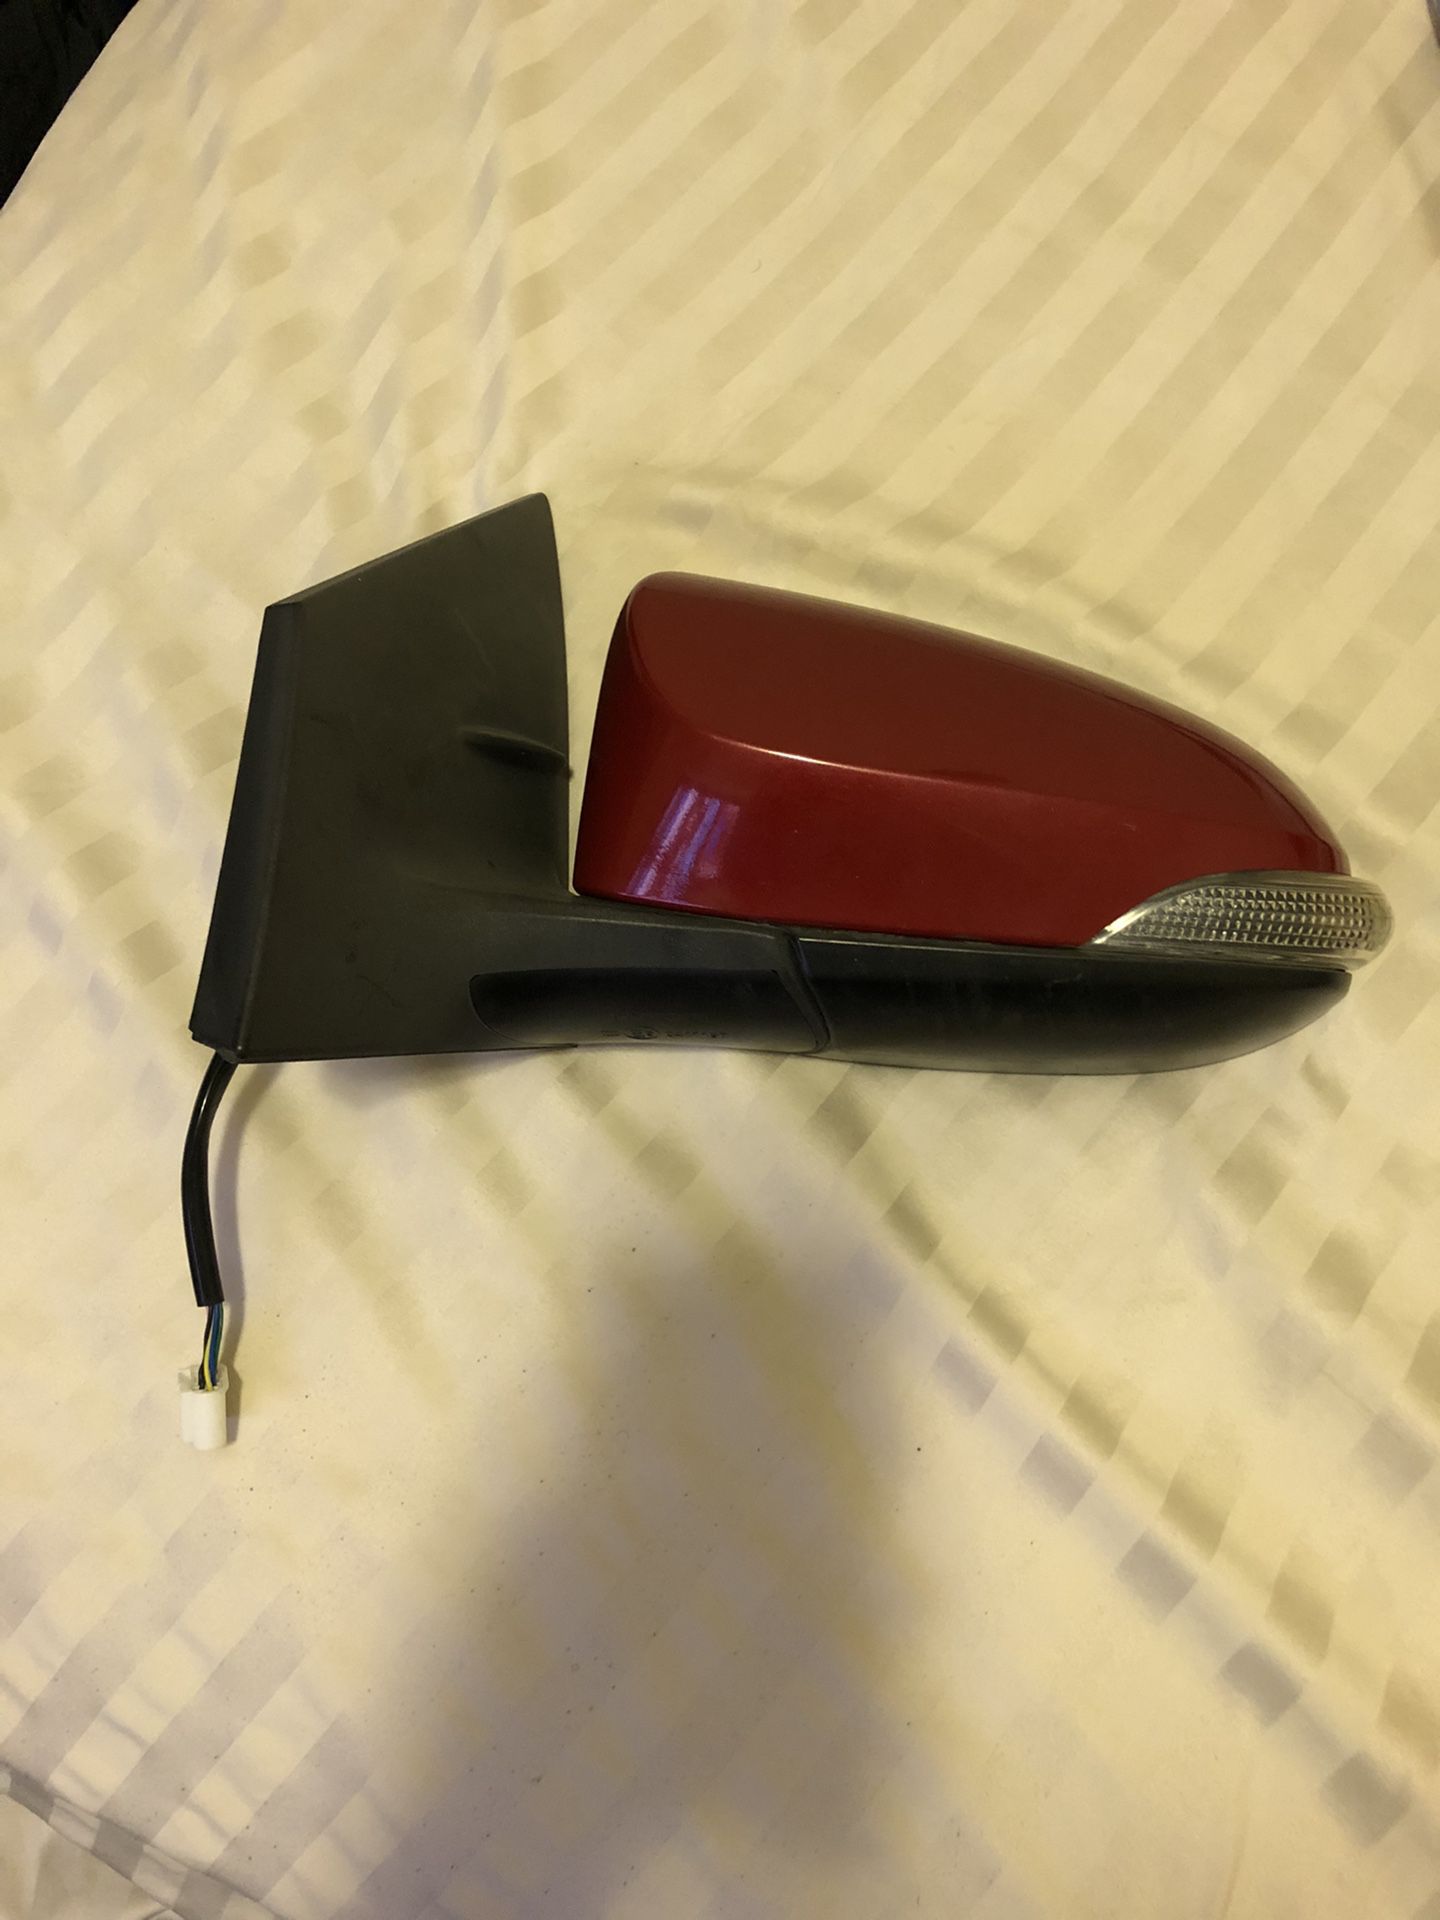 Toyota Corolla s 2014 2015 2016 2017 2018 left driver door mirror heated red Authentic oem only missing mirror glass